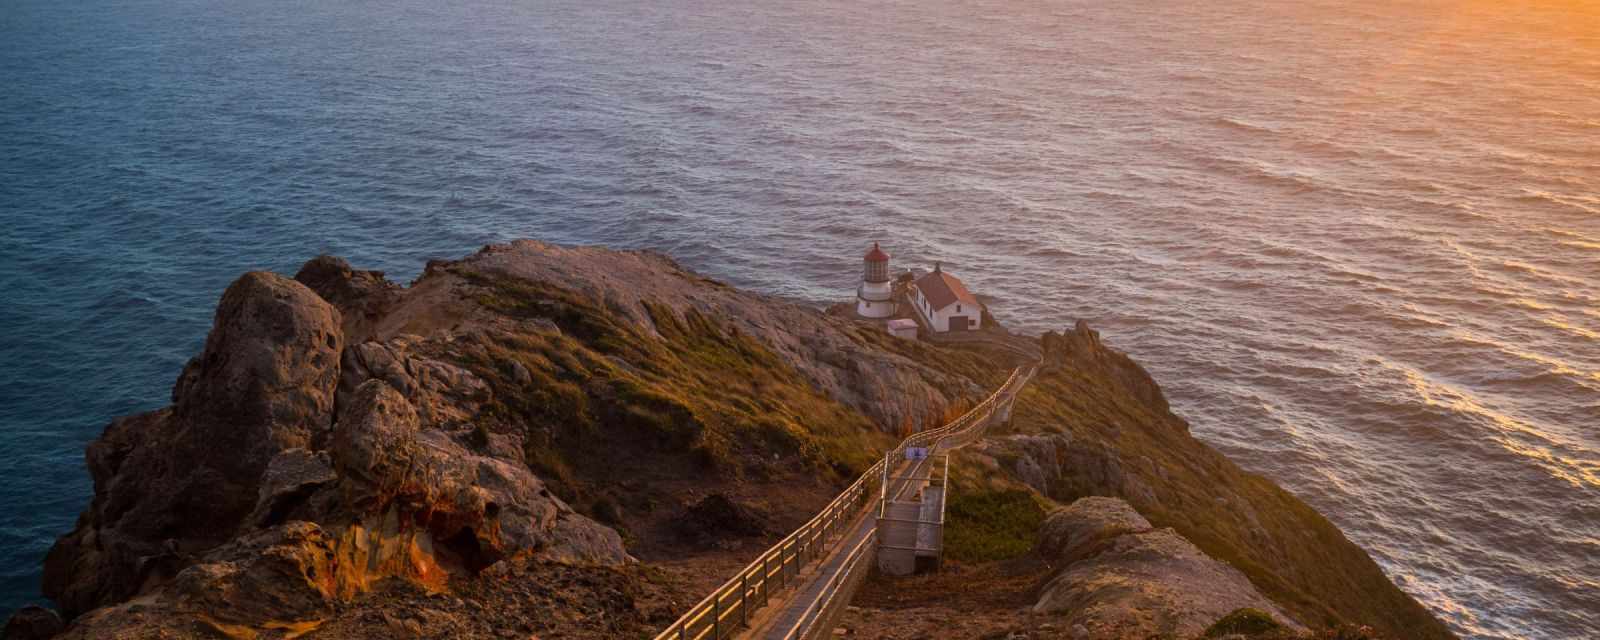 The Point Reyes Lighthouse at sunset.